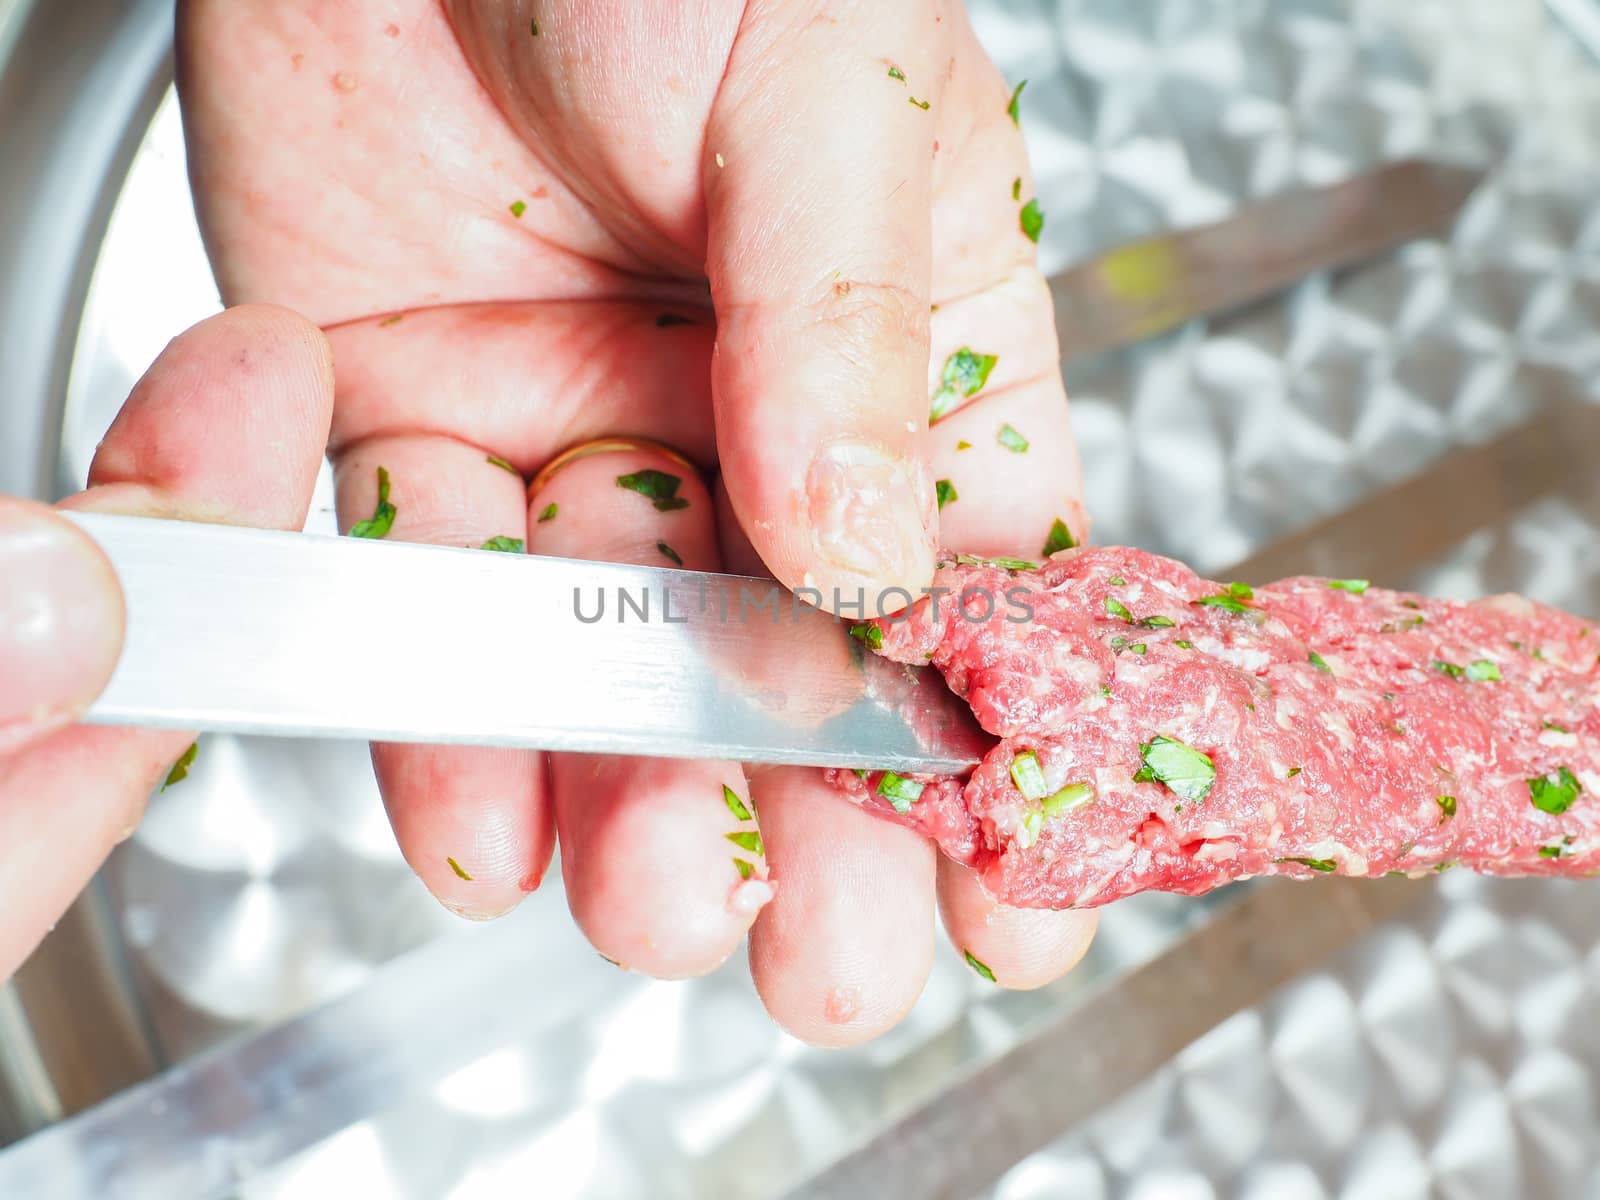 A chef making shish kebab of red meat with parsley over metal plate